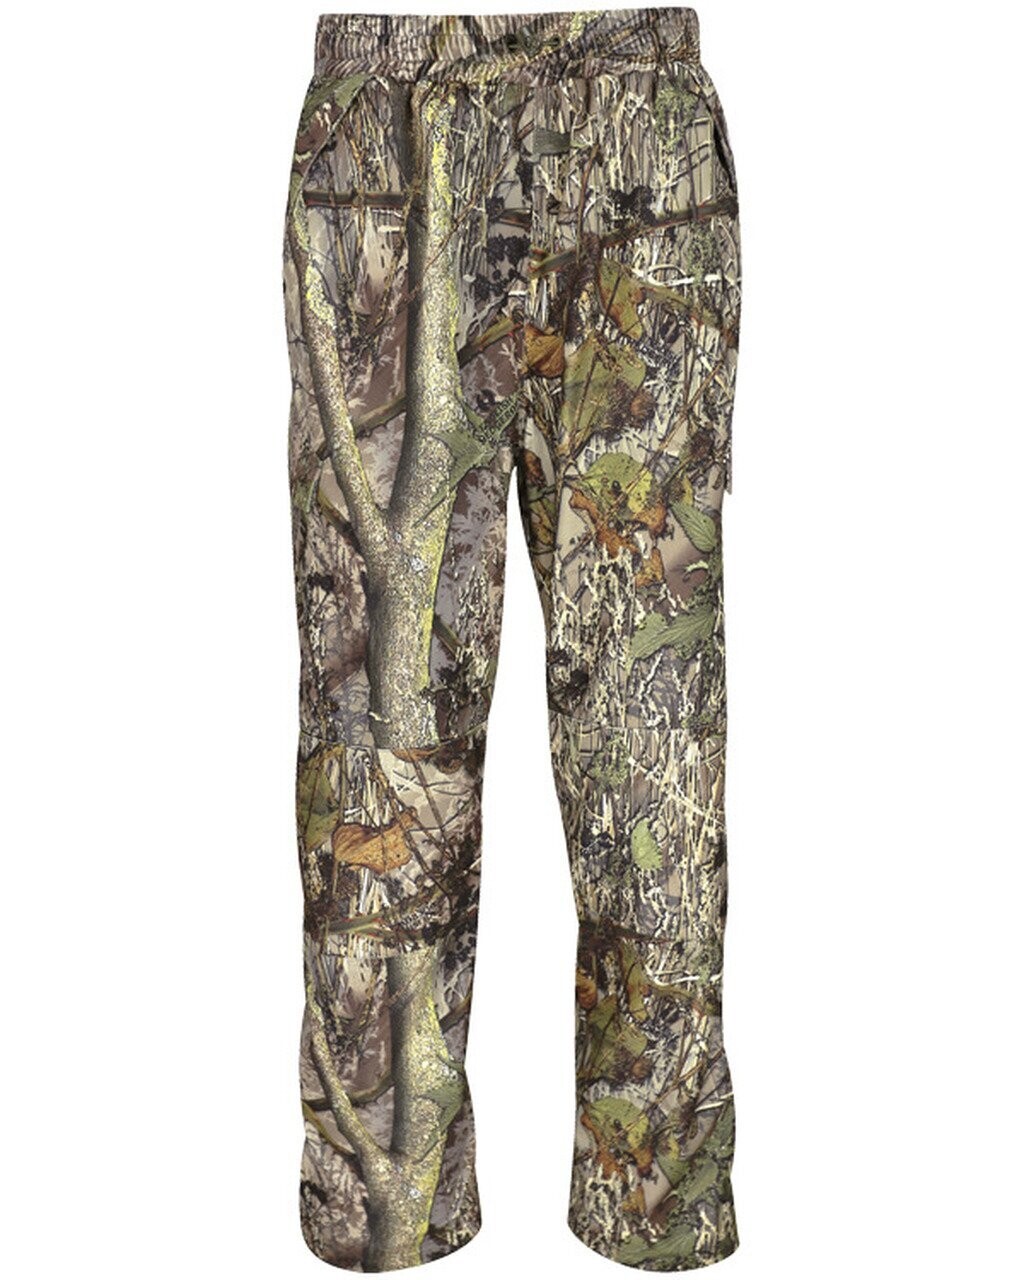 *OFFER* New Huntsbury English Hedgerow Classic Hunting Trousers